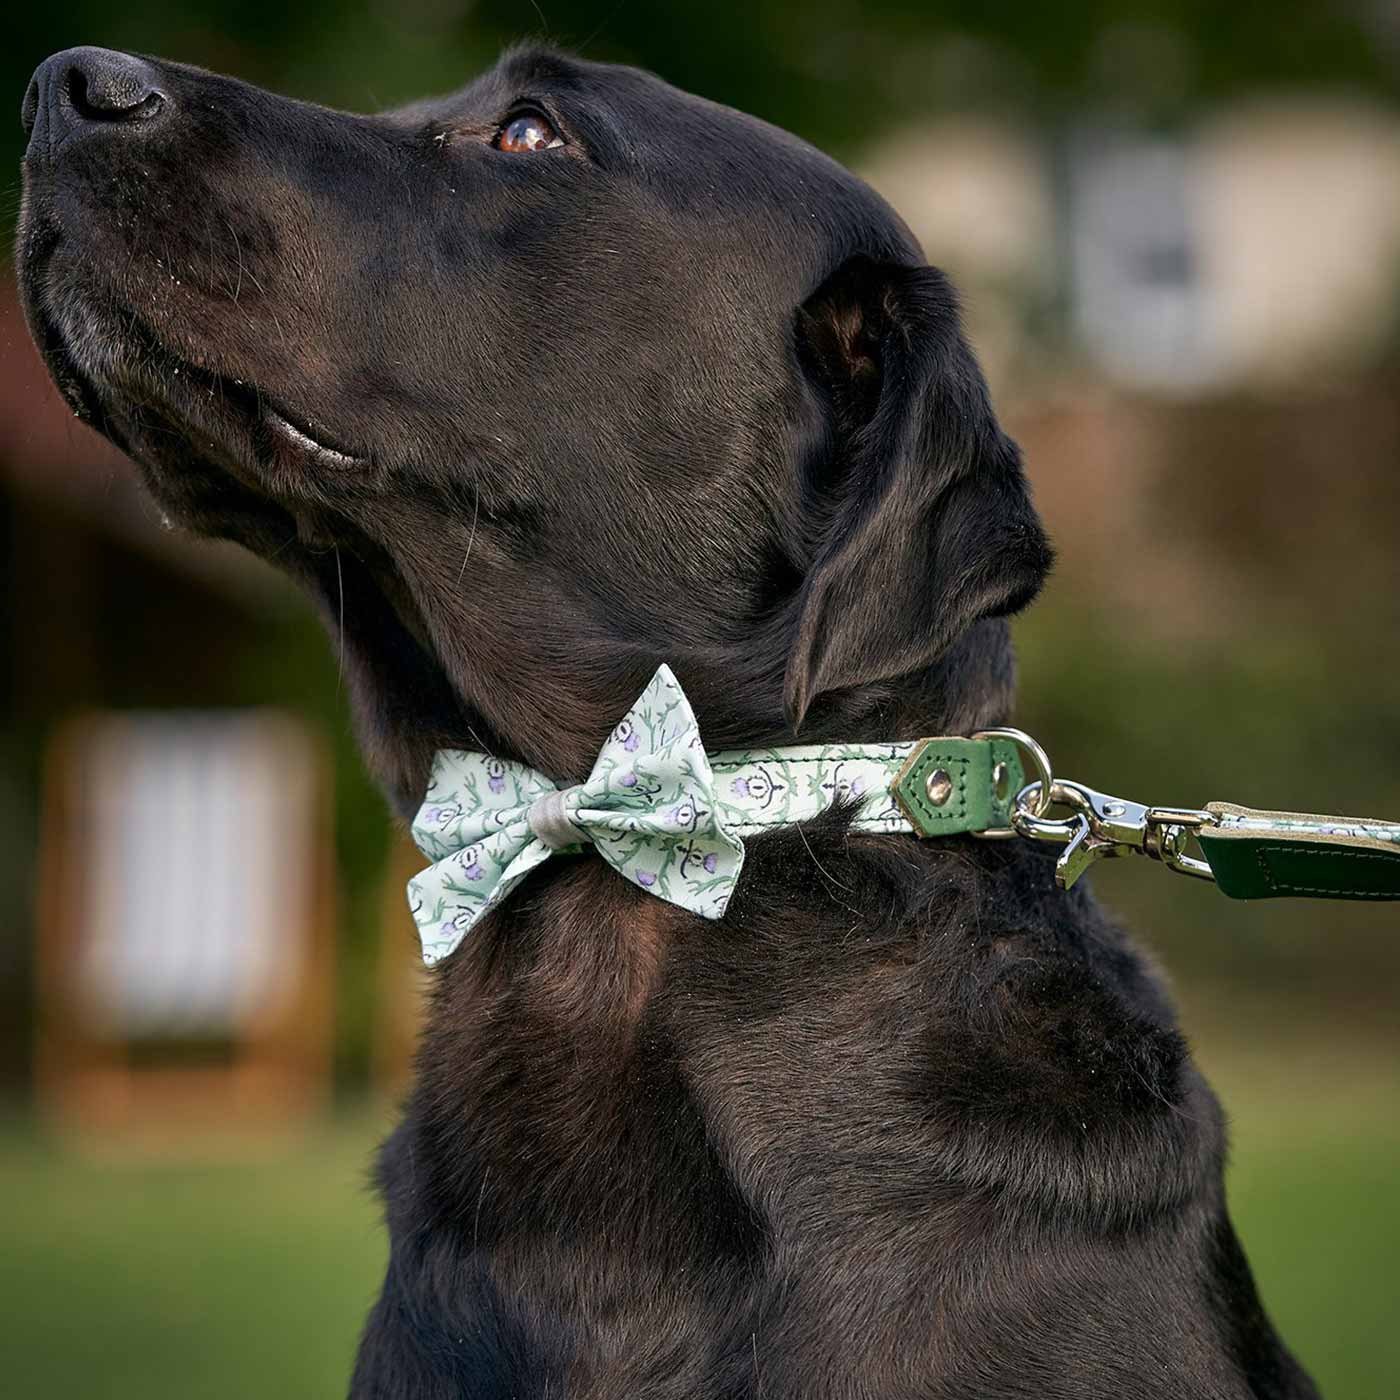 [color:stag] Set & accessorize your pooch ready for a stylish dog walk with Hiro + Wolf X L&L Dog Collar, the perfect dog walking accessory! Made using strong webbing lining to provide extra strength! Available in 3 stylish designs and 5 sizes at Lords & Labradors US